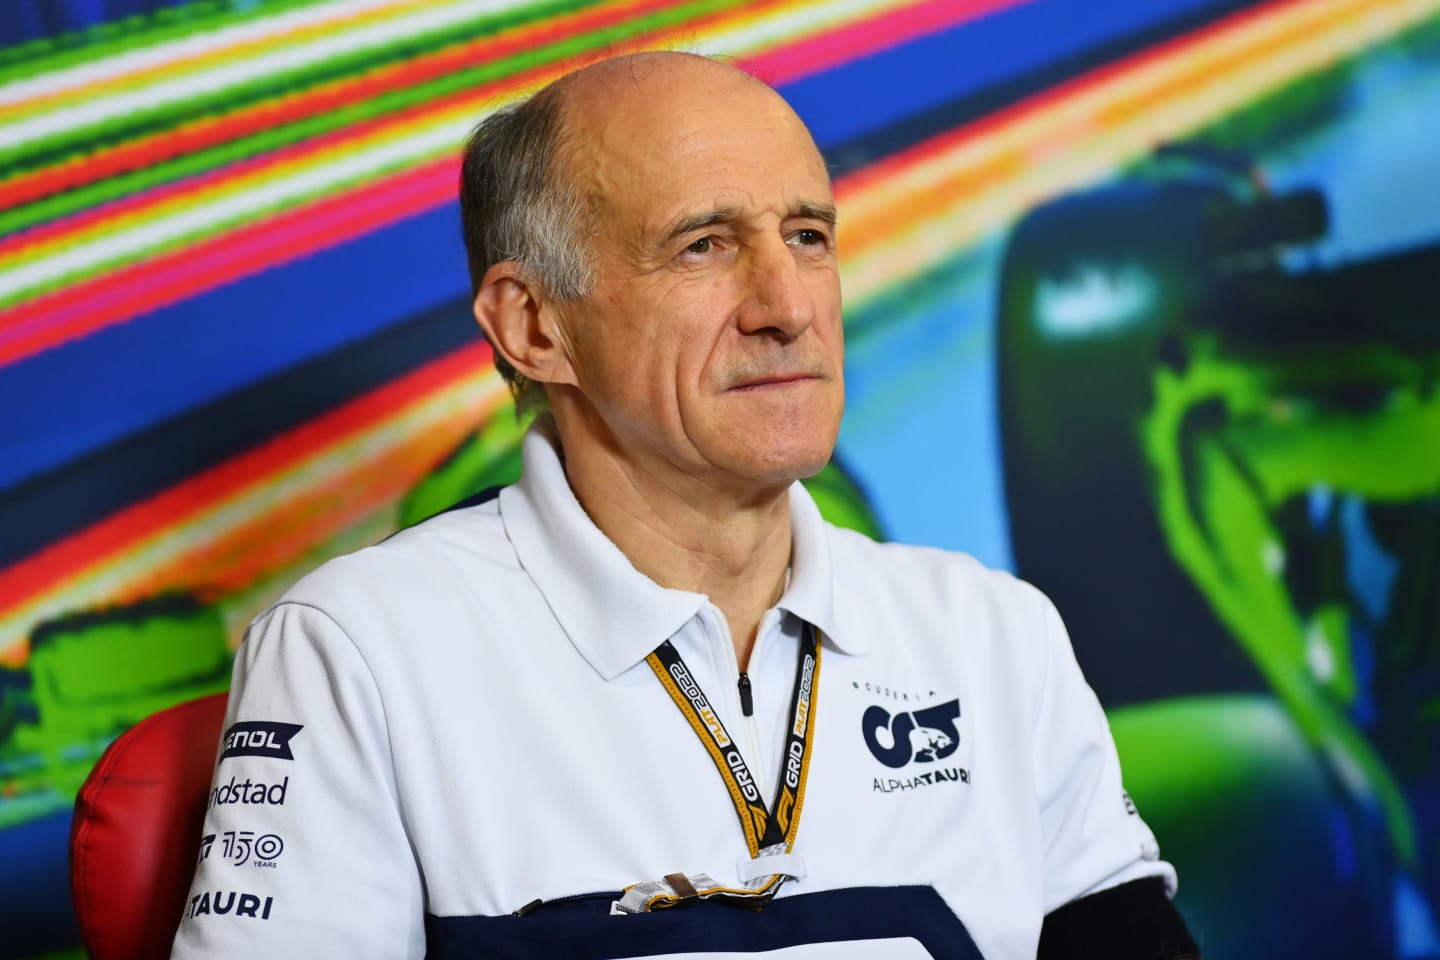 MONZA, ITALY - SEPTEMBER 10: Scuderia AlphaTauri Team Principal Franz Tost attends the Team Principals Press Conference prior to final practice ahead of the F1 Grand Prix of Italy at Autodromo Nazionale Monza on September 10, 2022 in Monza, Italy. (Photo by Dan Mullan/Getty Images)